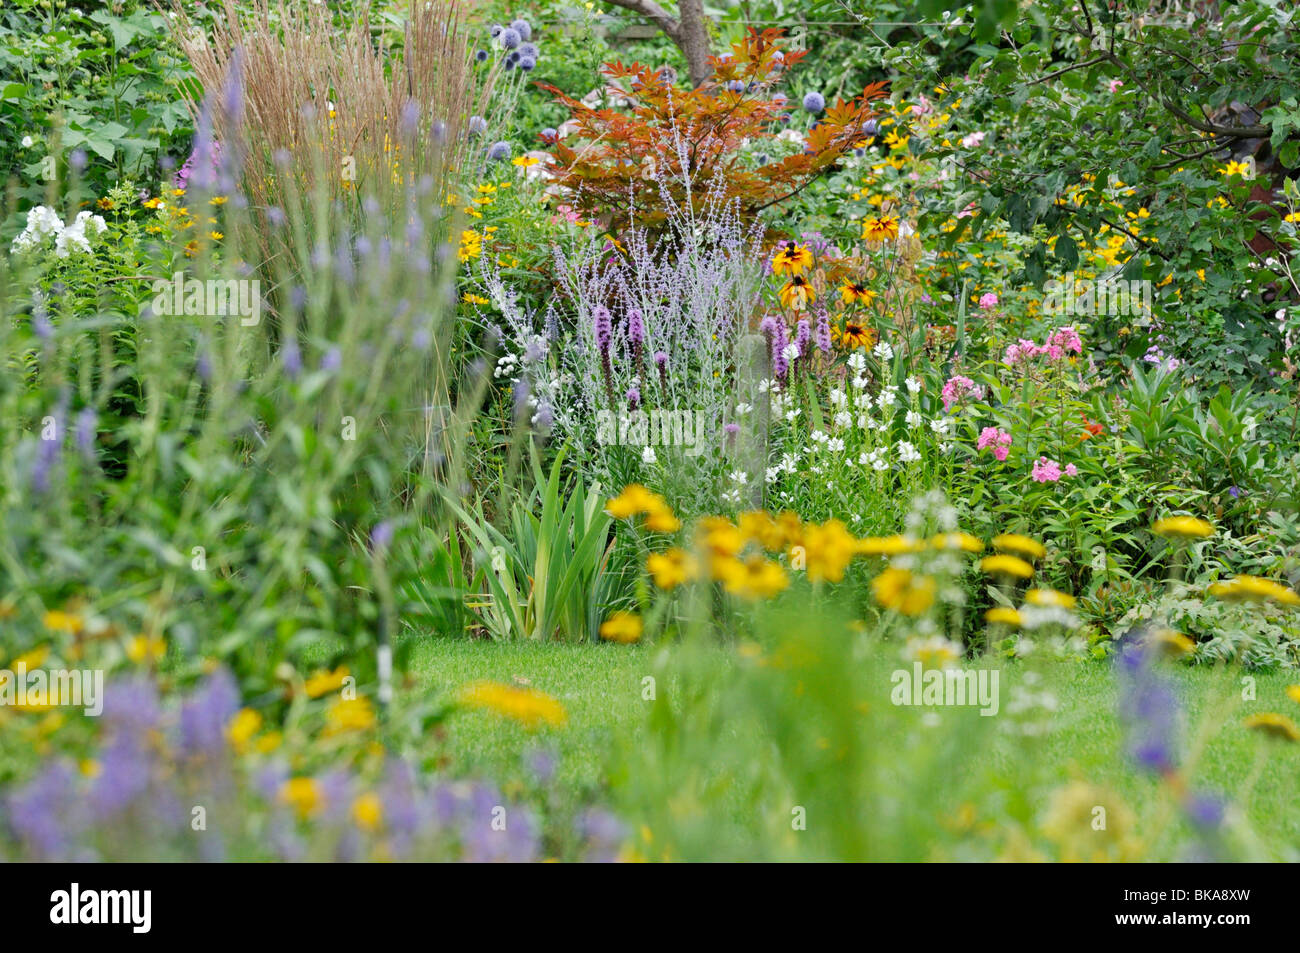 Maple (Acer), Russian sage (Perovskia), cone flower (Rudbeckia) and obedient plant (Physostegia) Stock Photo